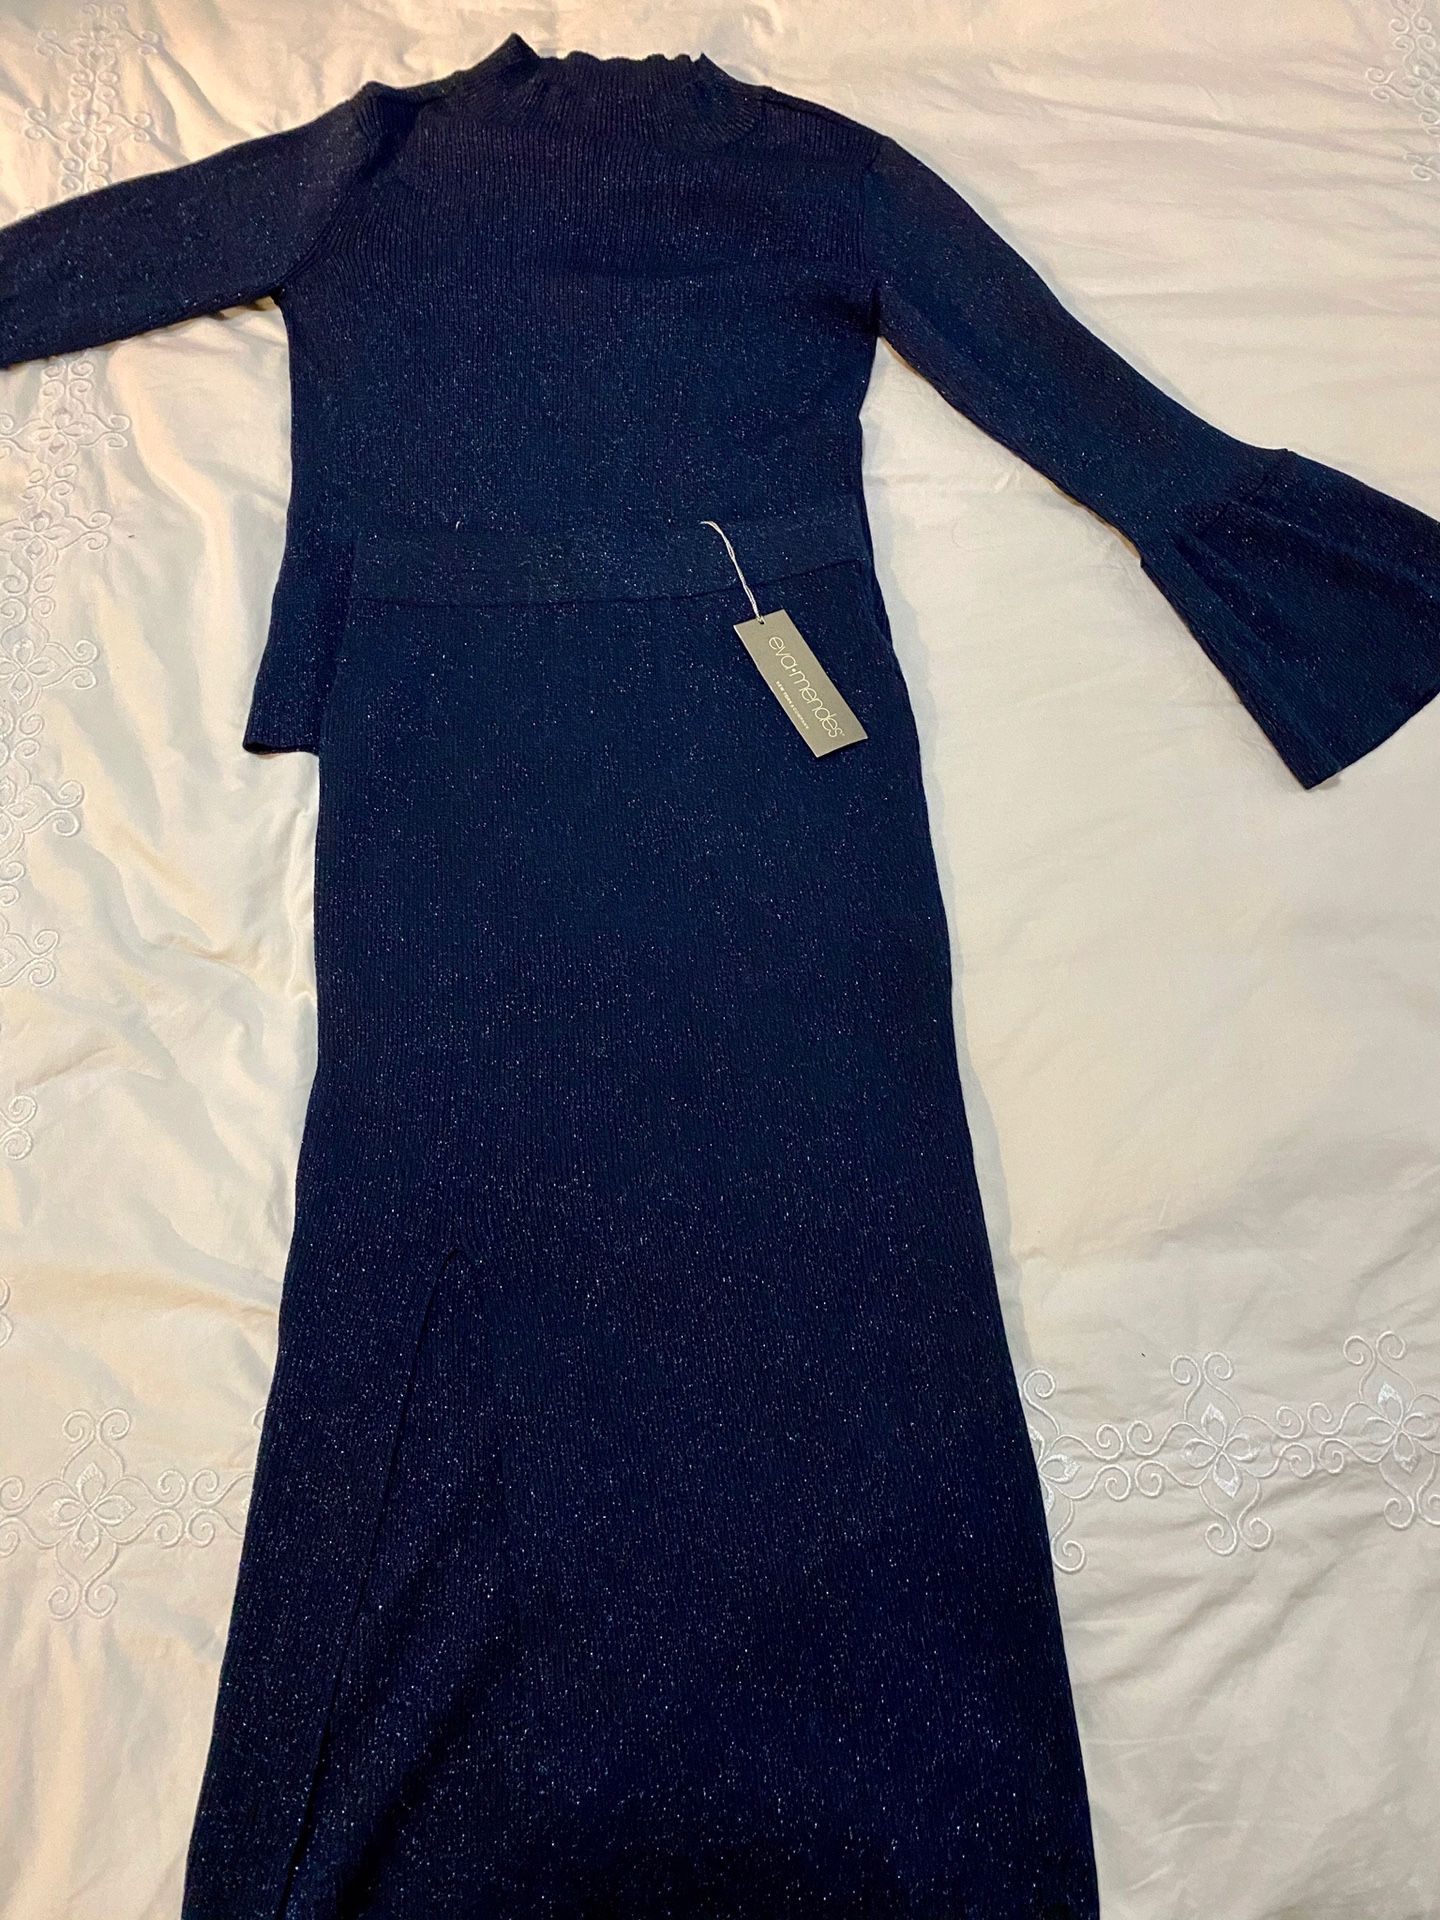 New with tags! Eva Mendez Sweater and skirt. Navy blue with a slight sparkle.